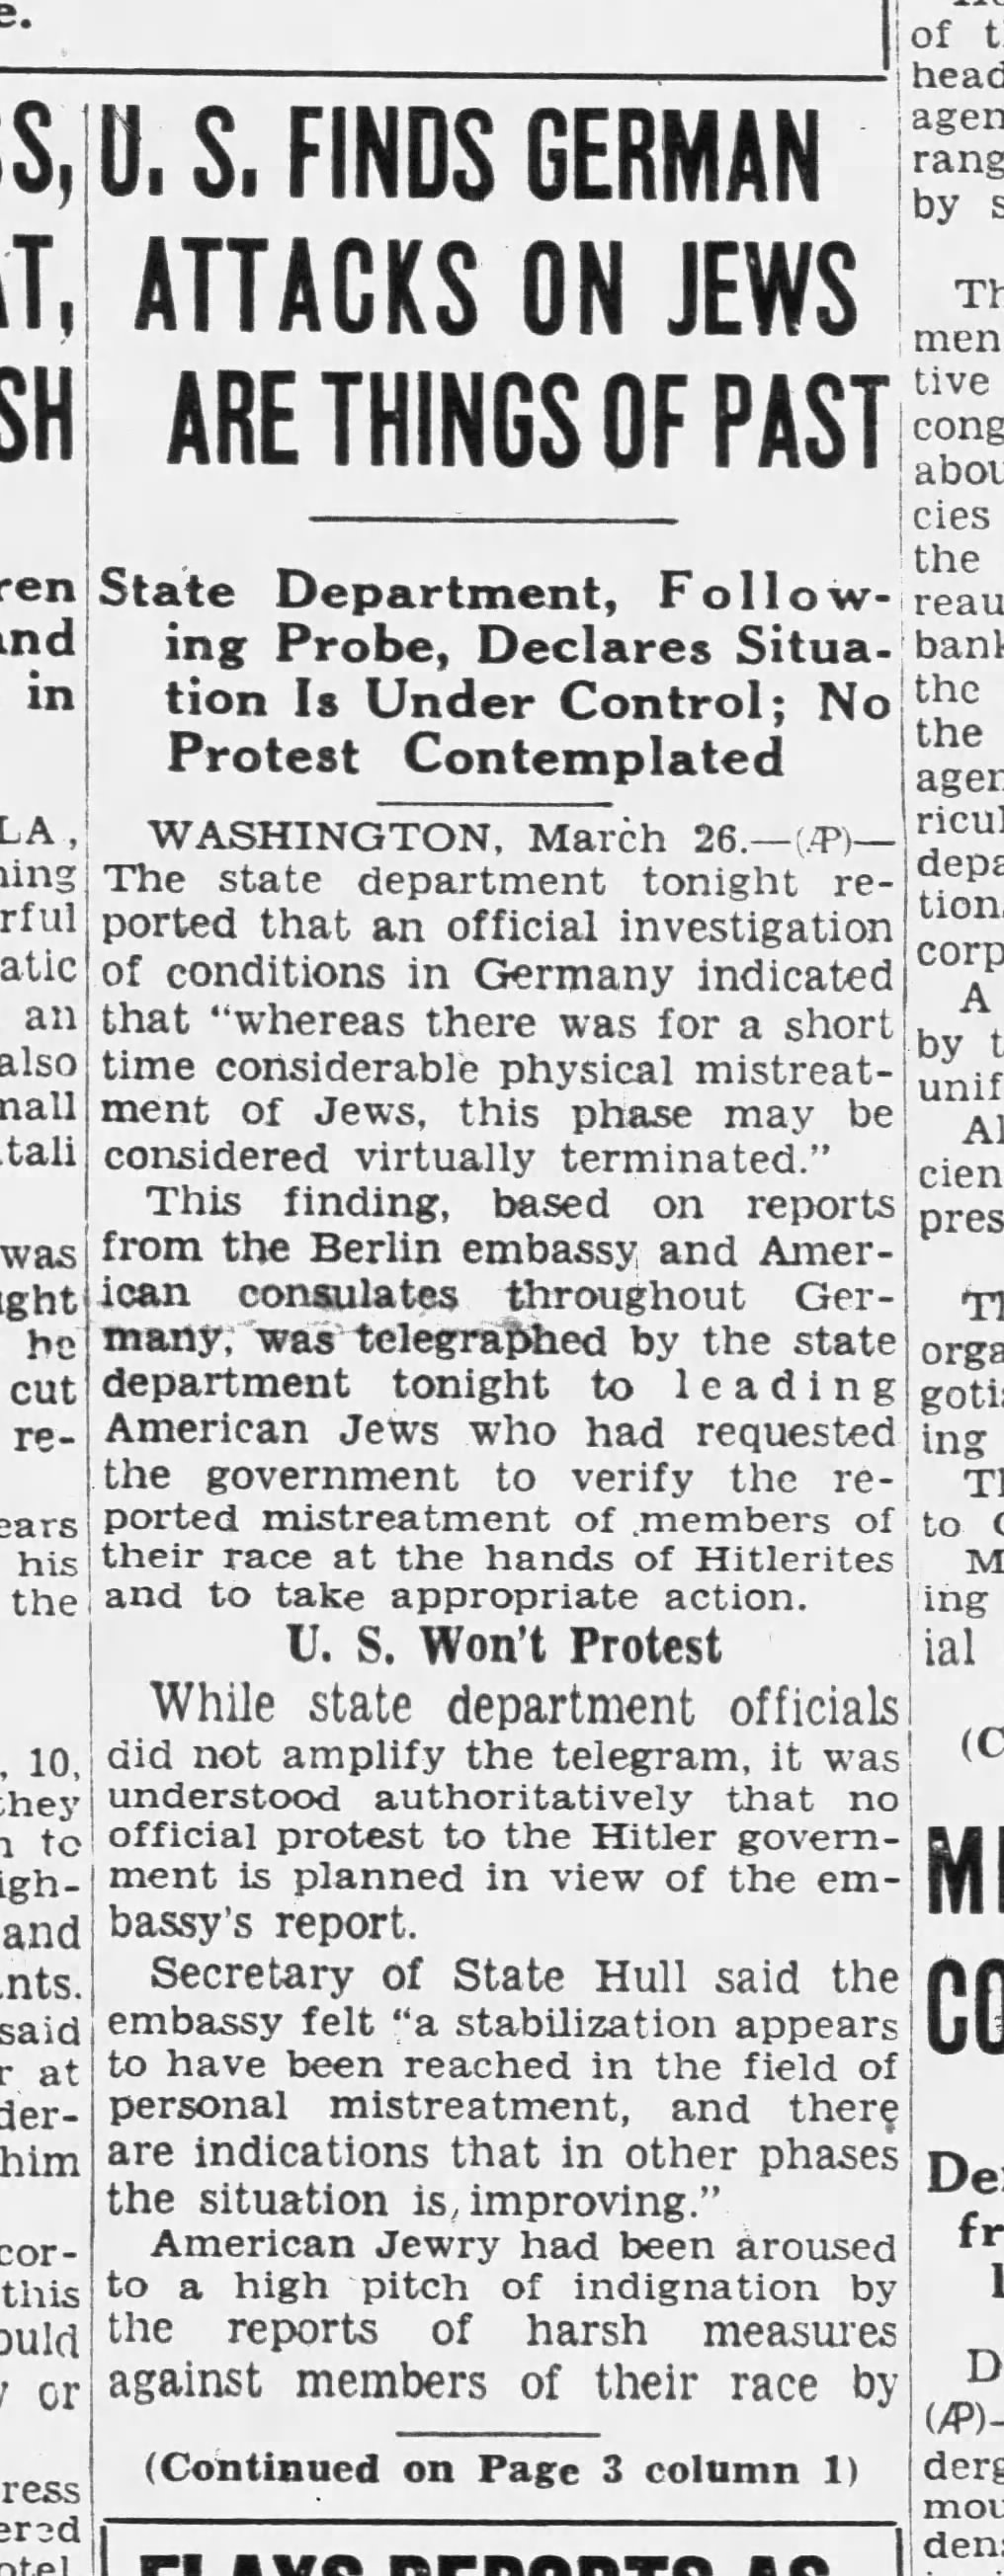 U.S. Finds German Attacks On Jews Are Things Of Past